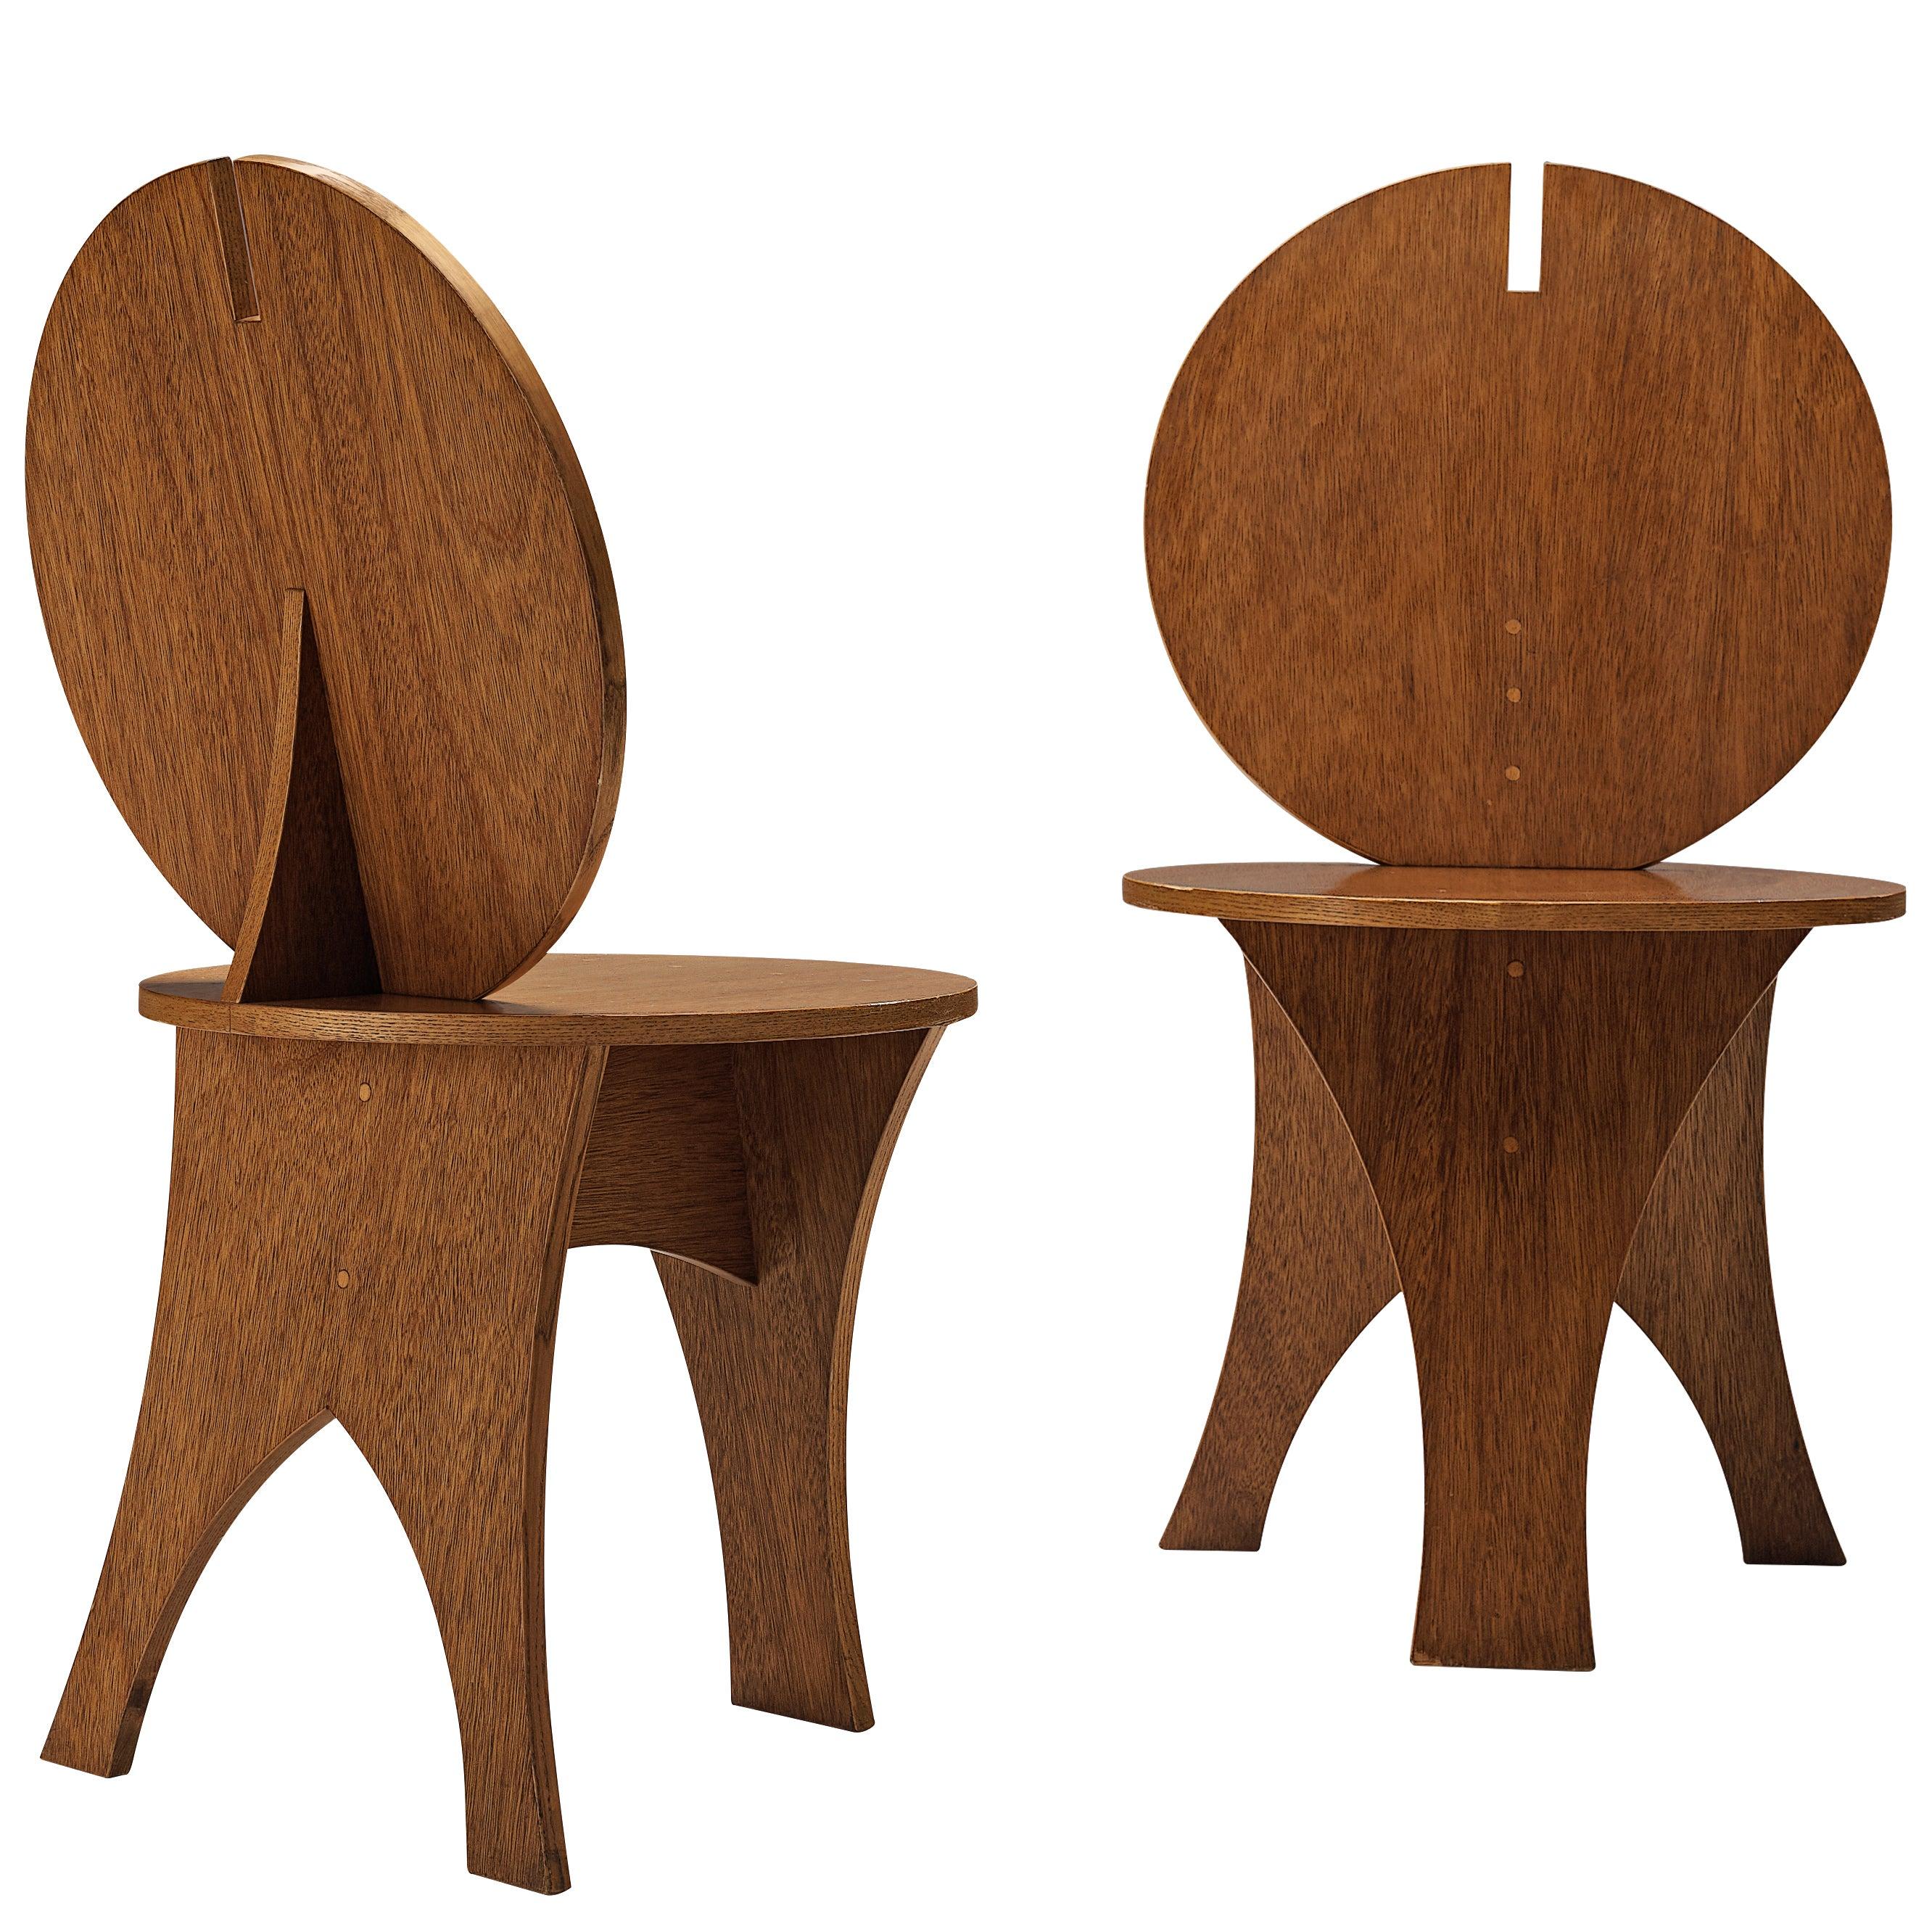 Pair of Sculptural Italian Side Chairs with Circular Backrest